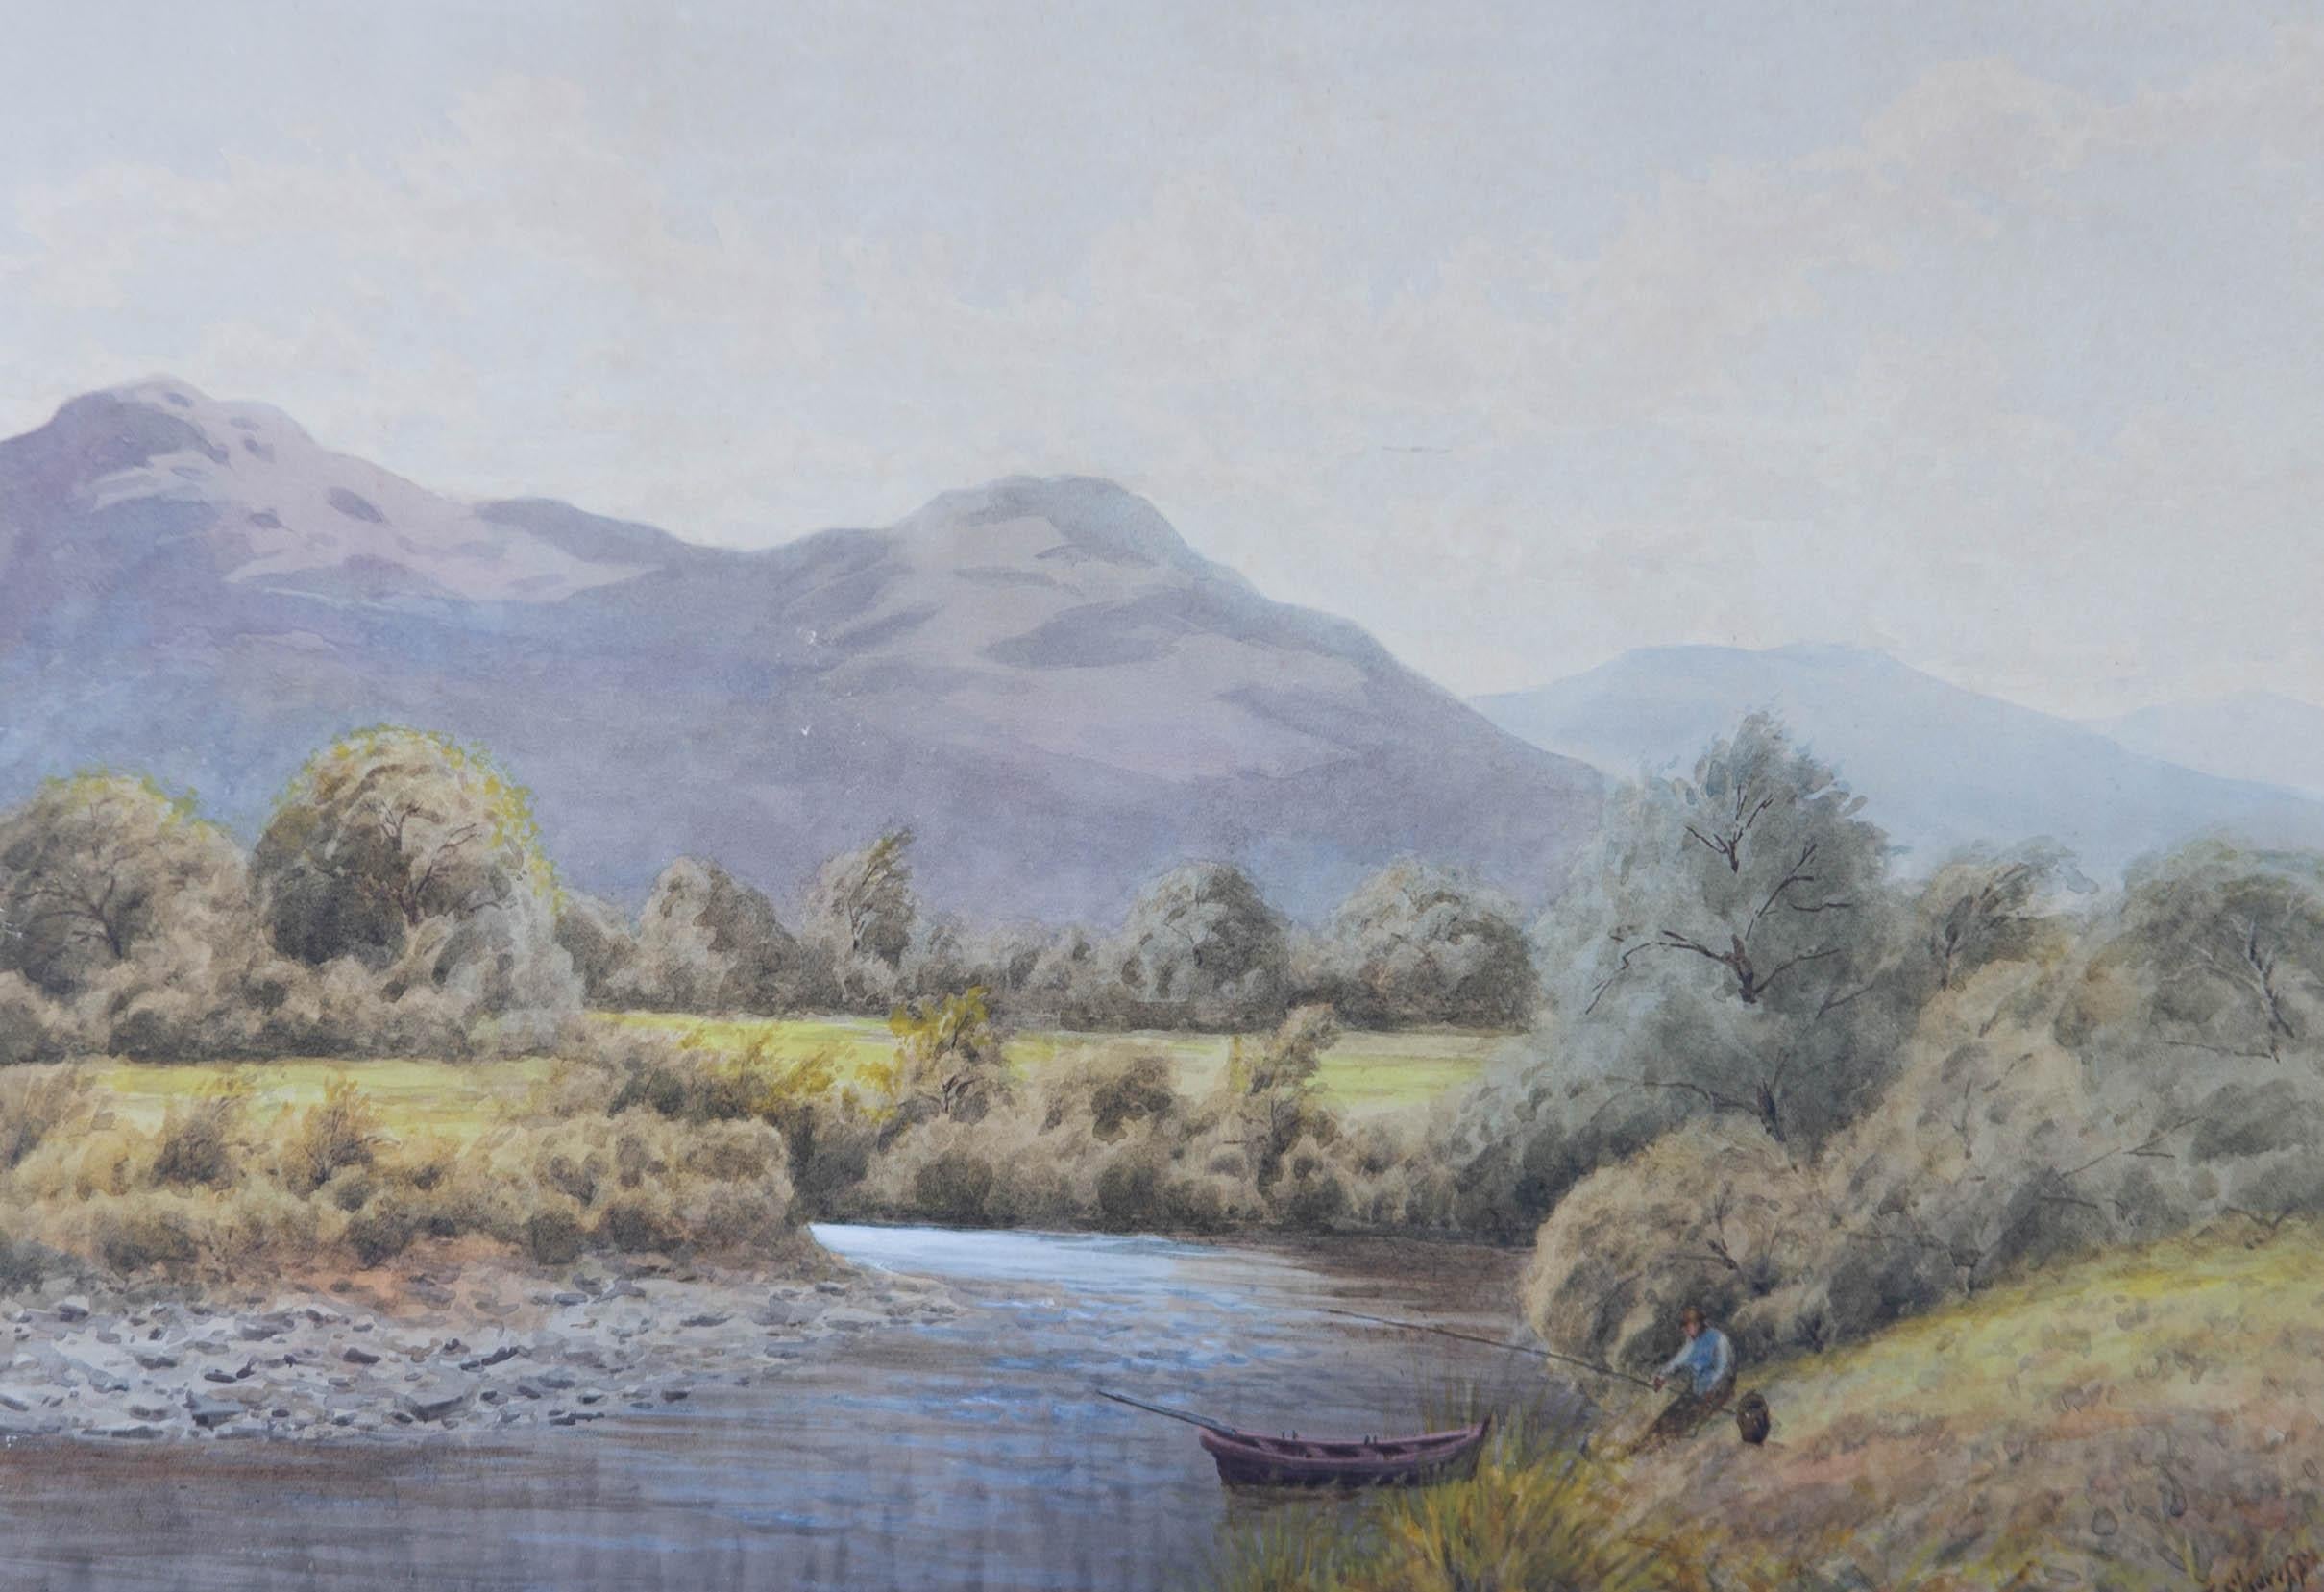 A landscape scene at the River Derwent in the valley of Borrowdale, Cumberland (now Cumbria). The first of two paintings by the artist depicting this river. Presented glazed in a gold card mount and a wooden frame with burr yew wood veneer and